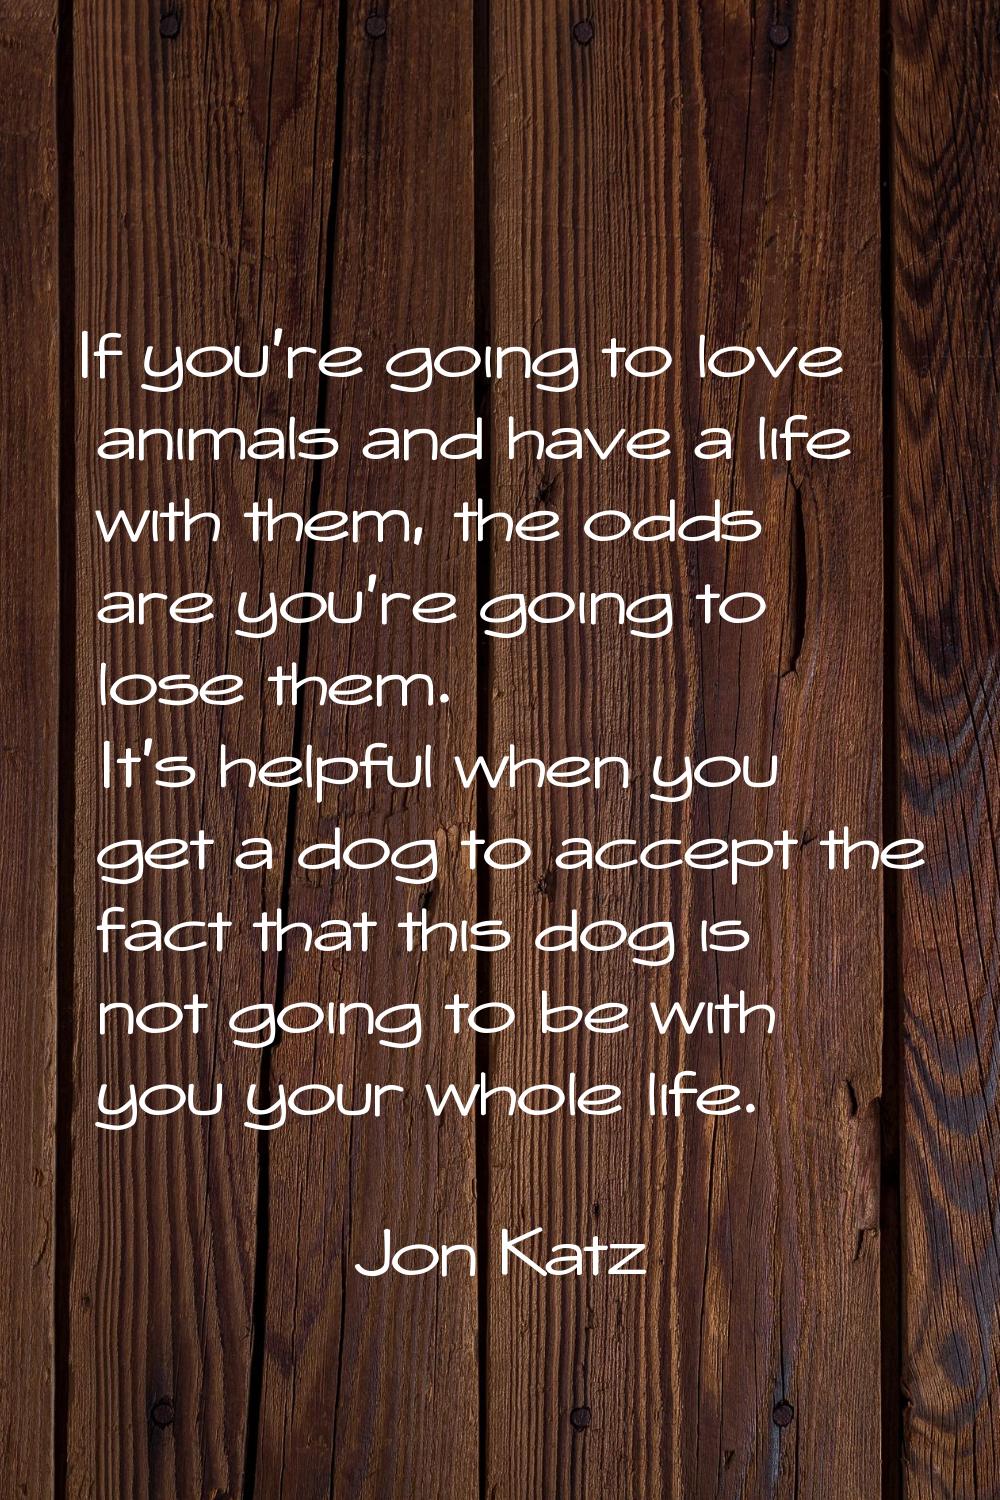 If you're going to love animals and have a life with them, the odds are you're going to lose them. 